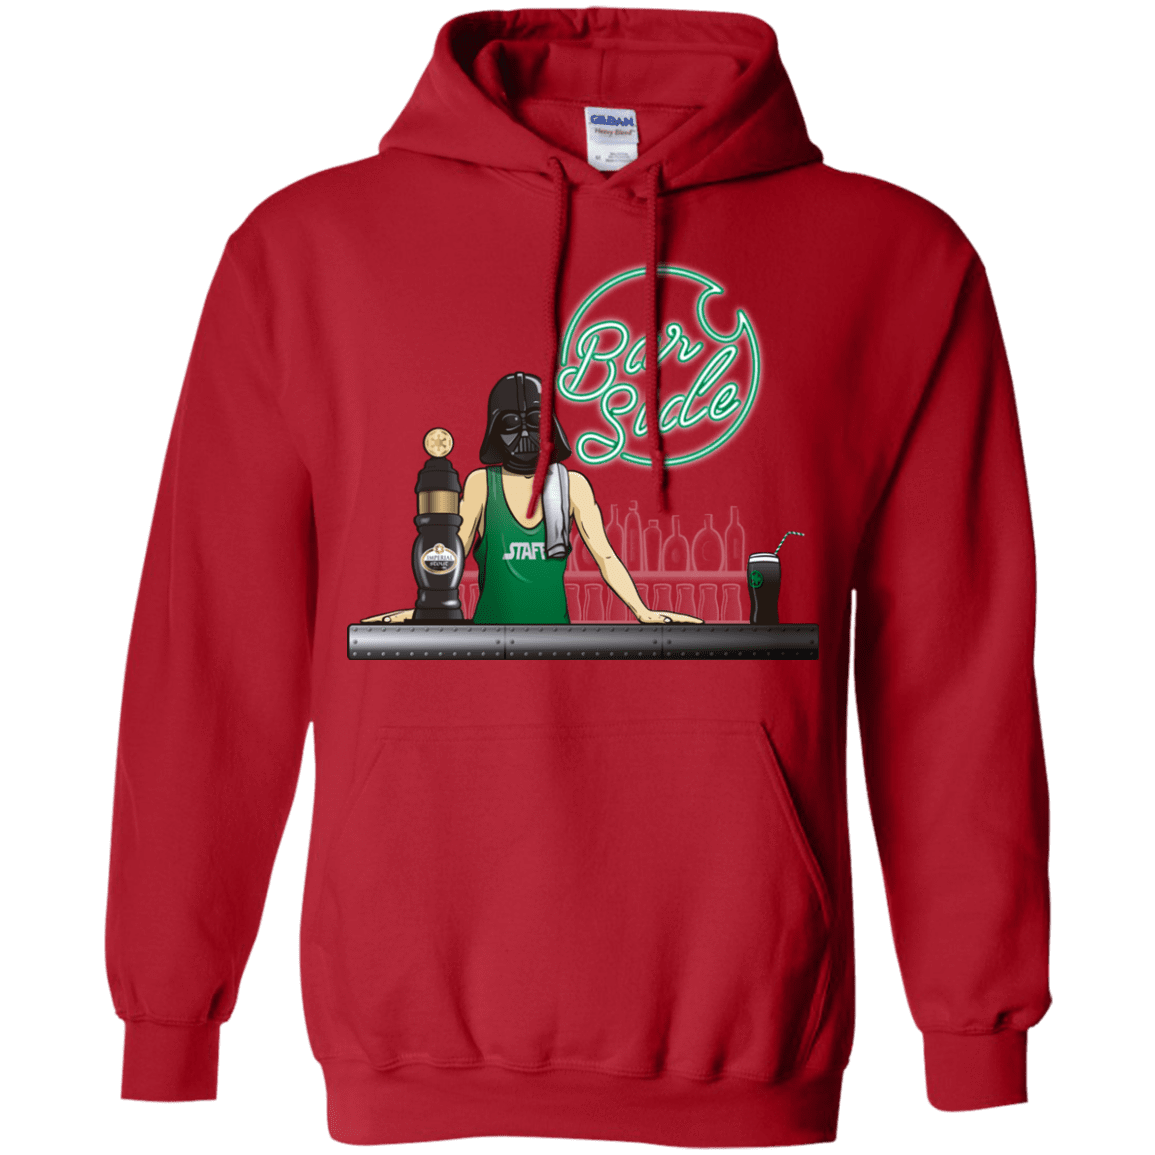 Sweatshirts Red / Small Bar side Pullover Hoodie